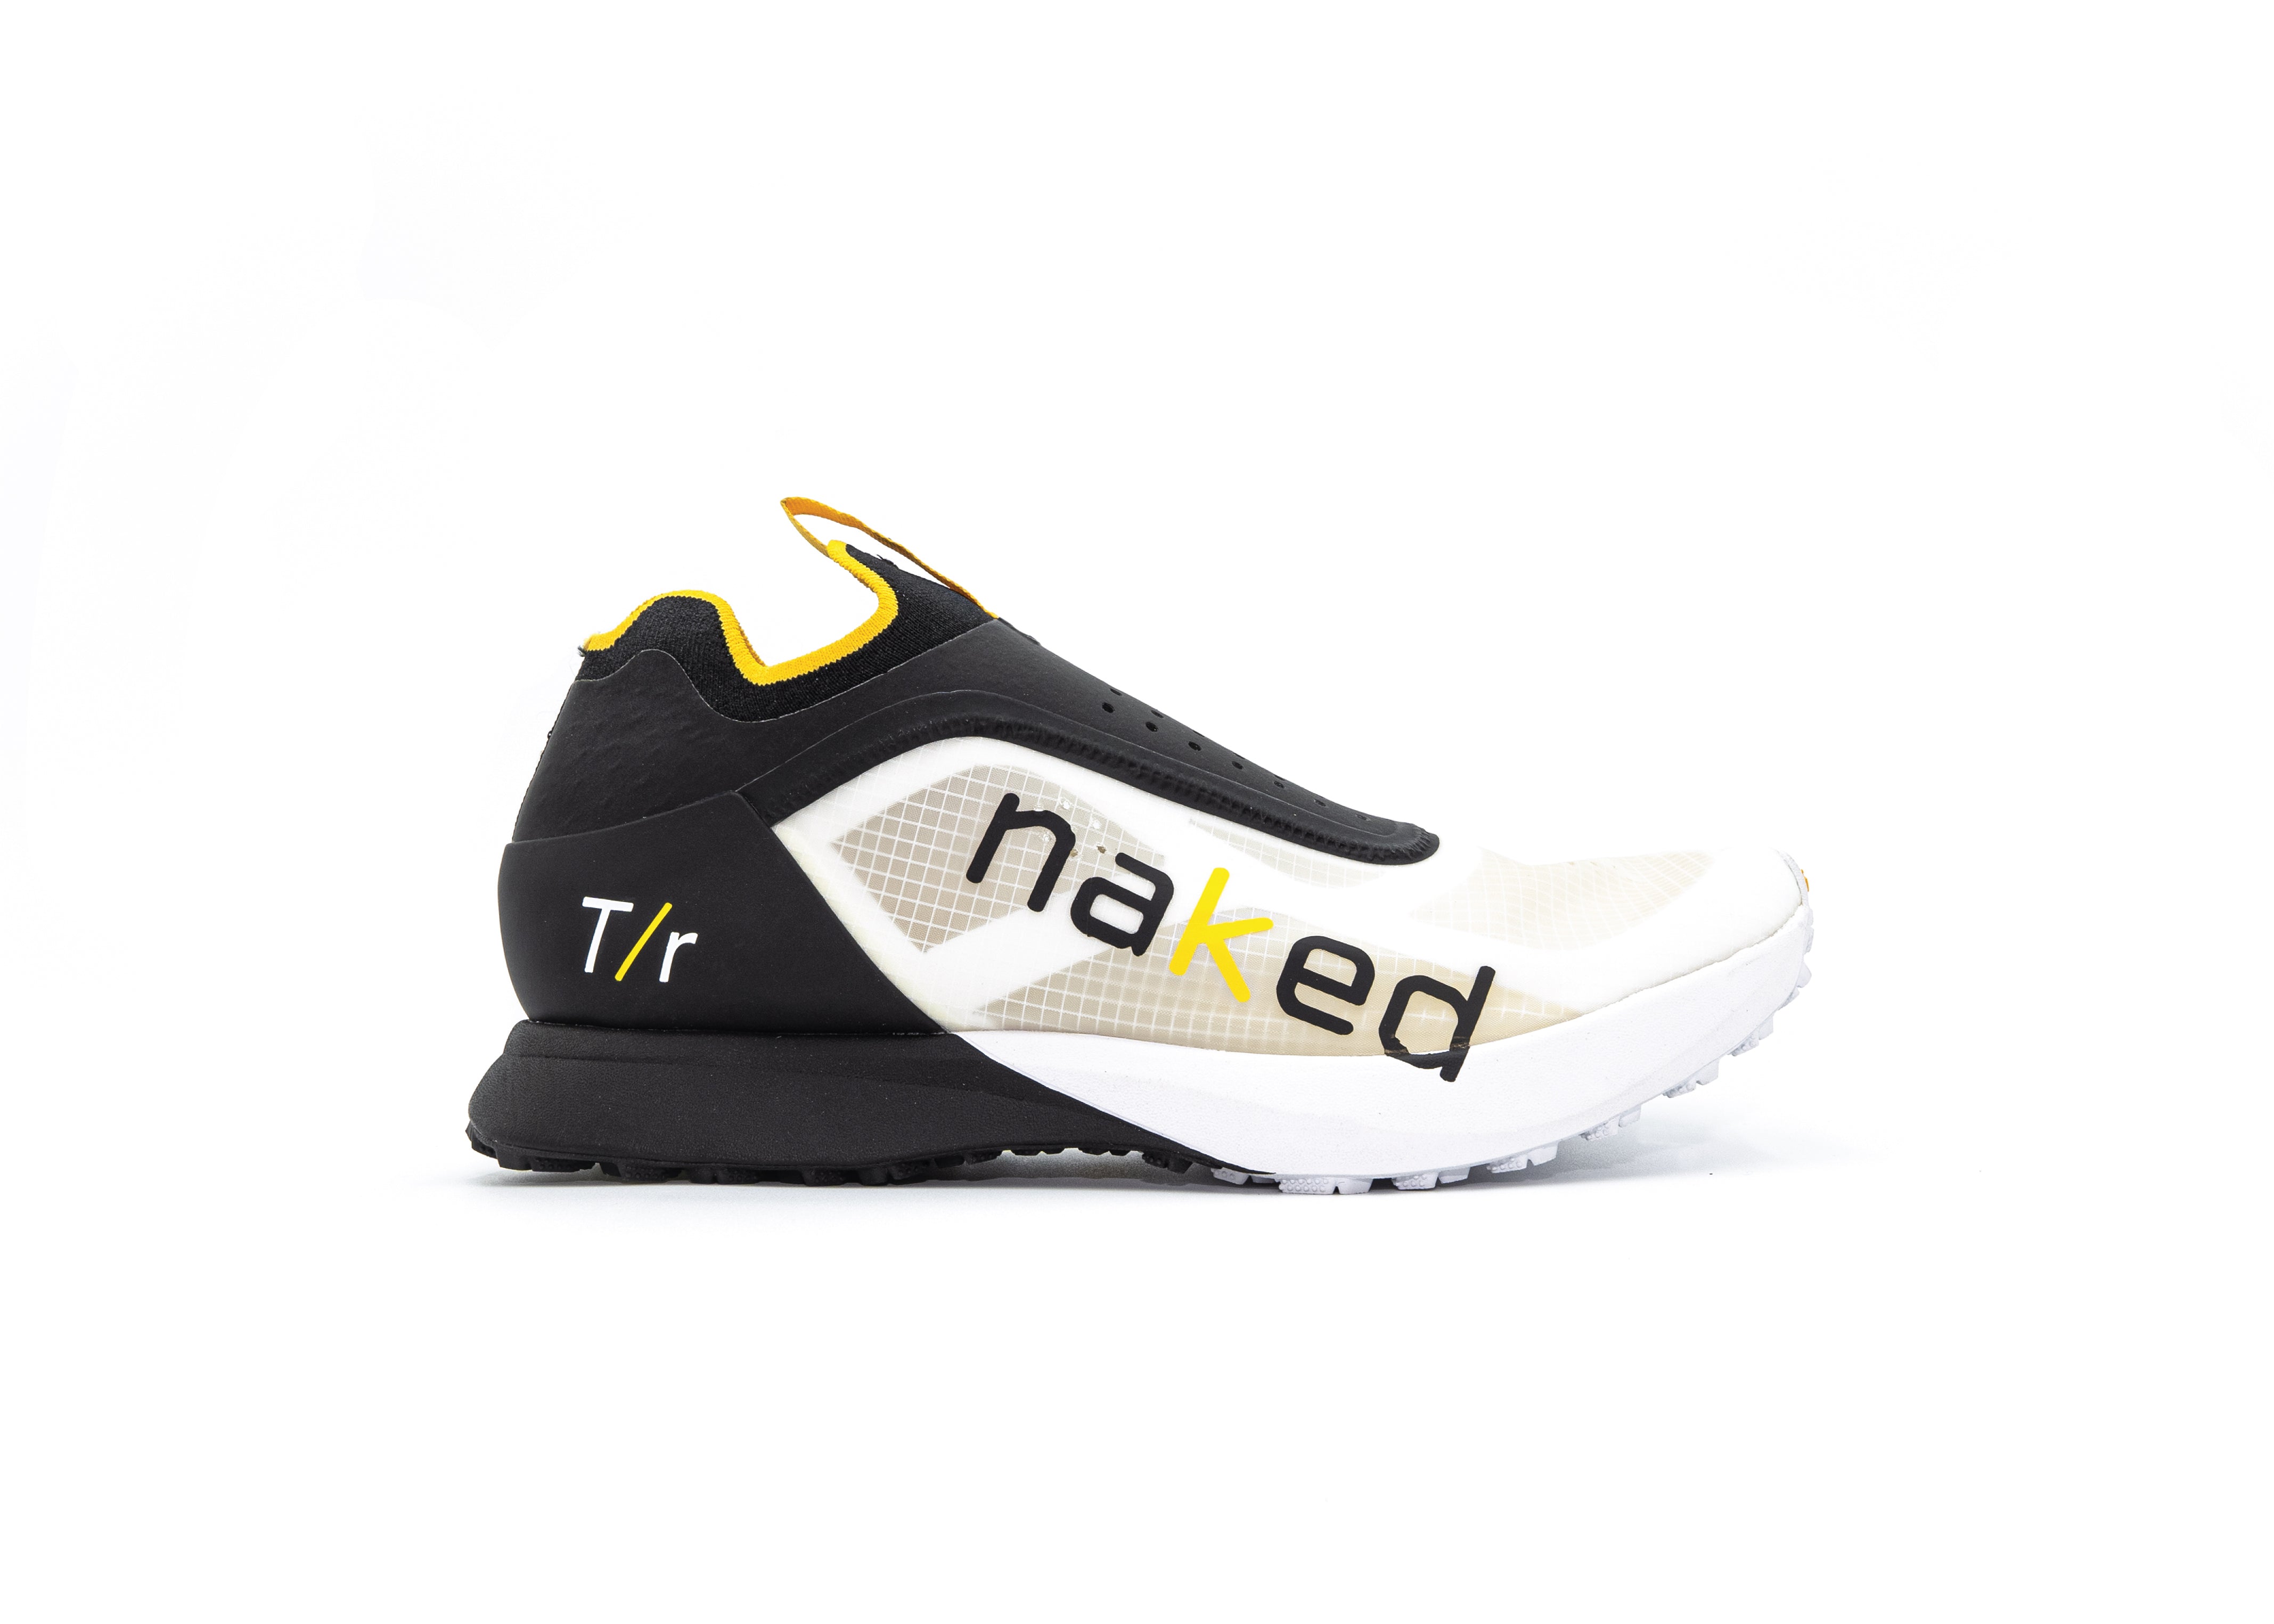 Naked® T/r Trail – Naked Sports Innovations